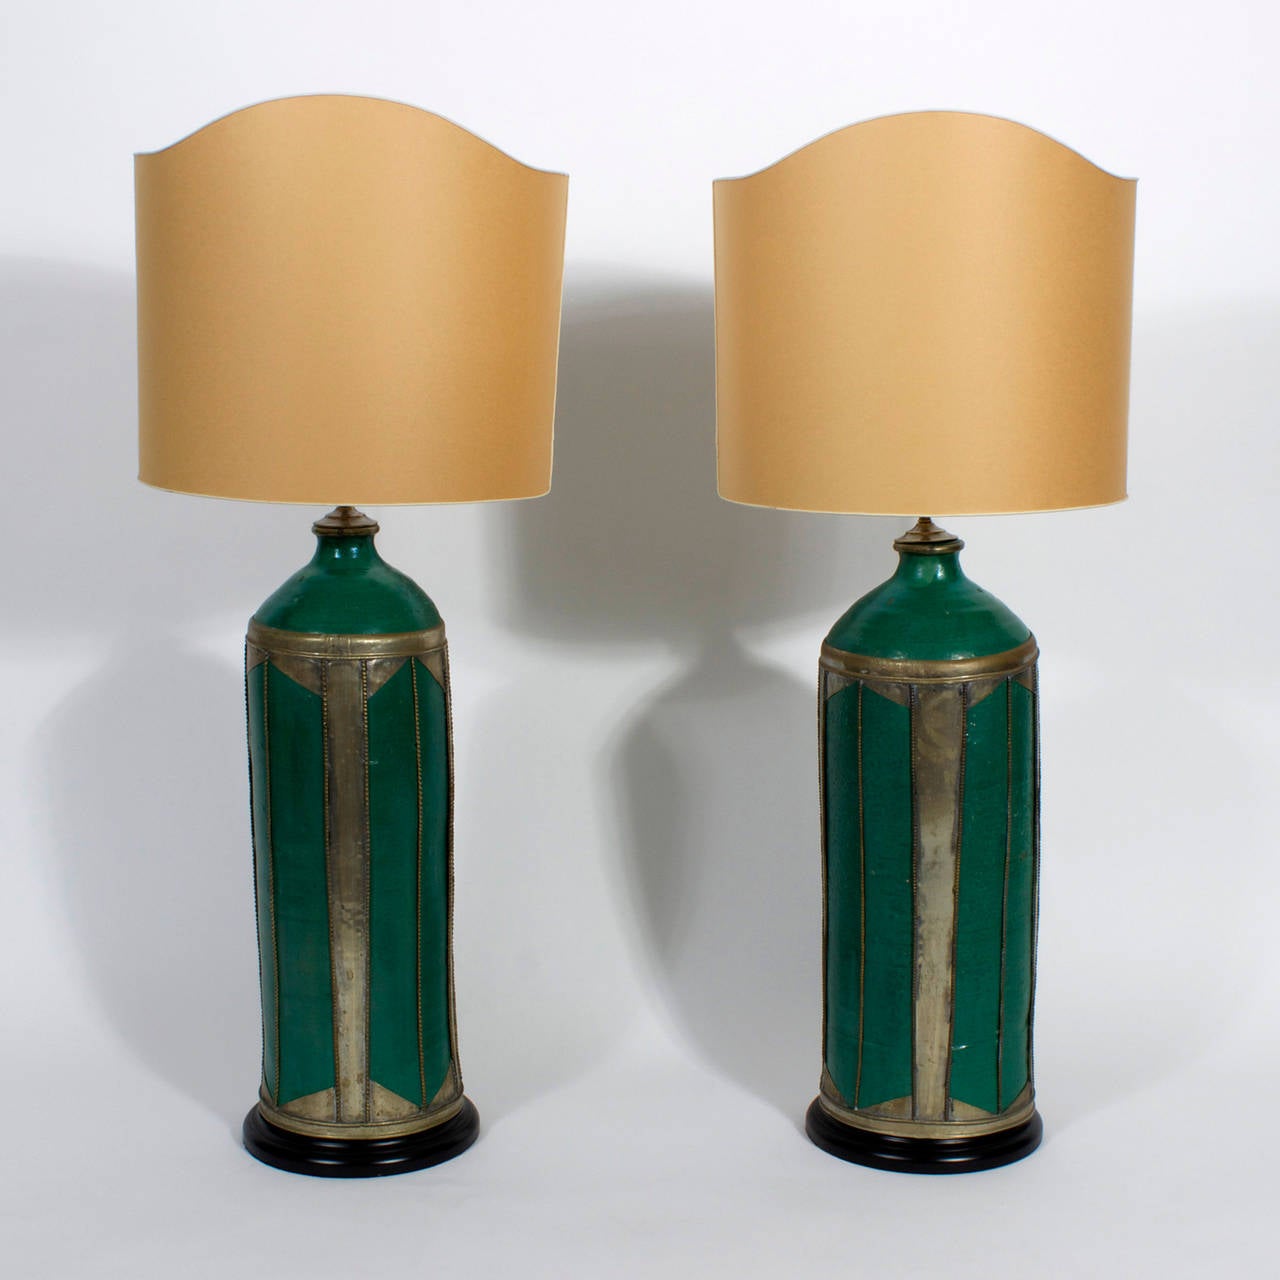 An interesting pair of custom green glazed pottery table lamps with applied hand hammered metal decoration and ebonized wood bases. These large scale and unique lamps have unusual custom shades, with scalloped tops and open backs, which allow the